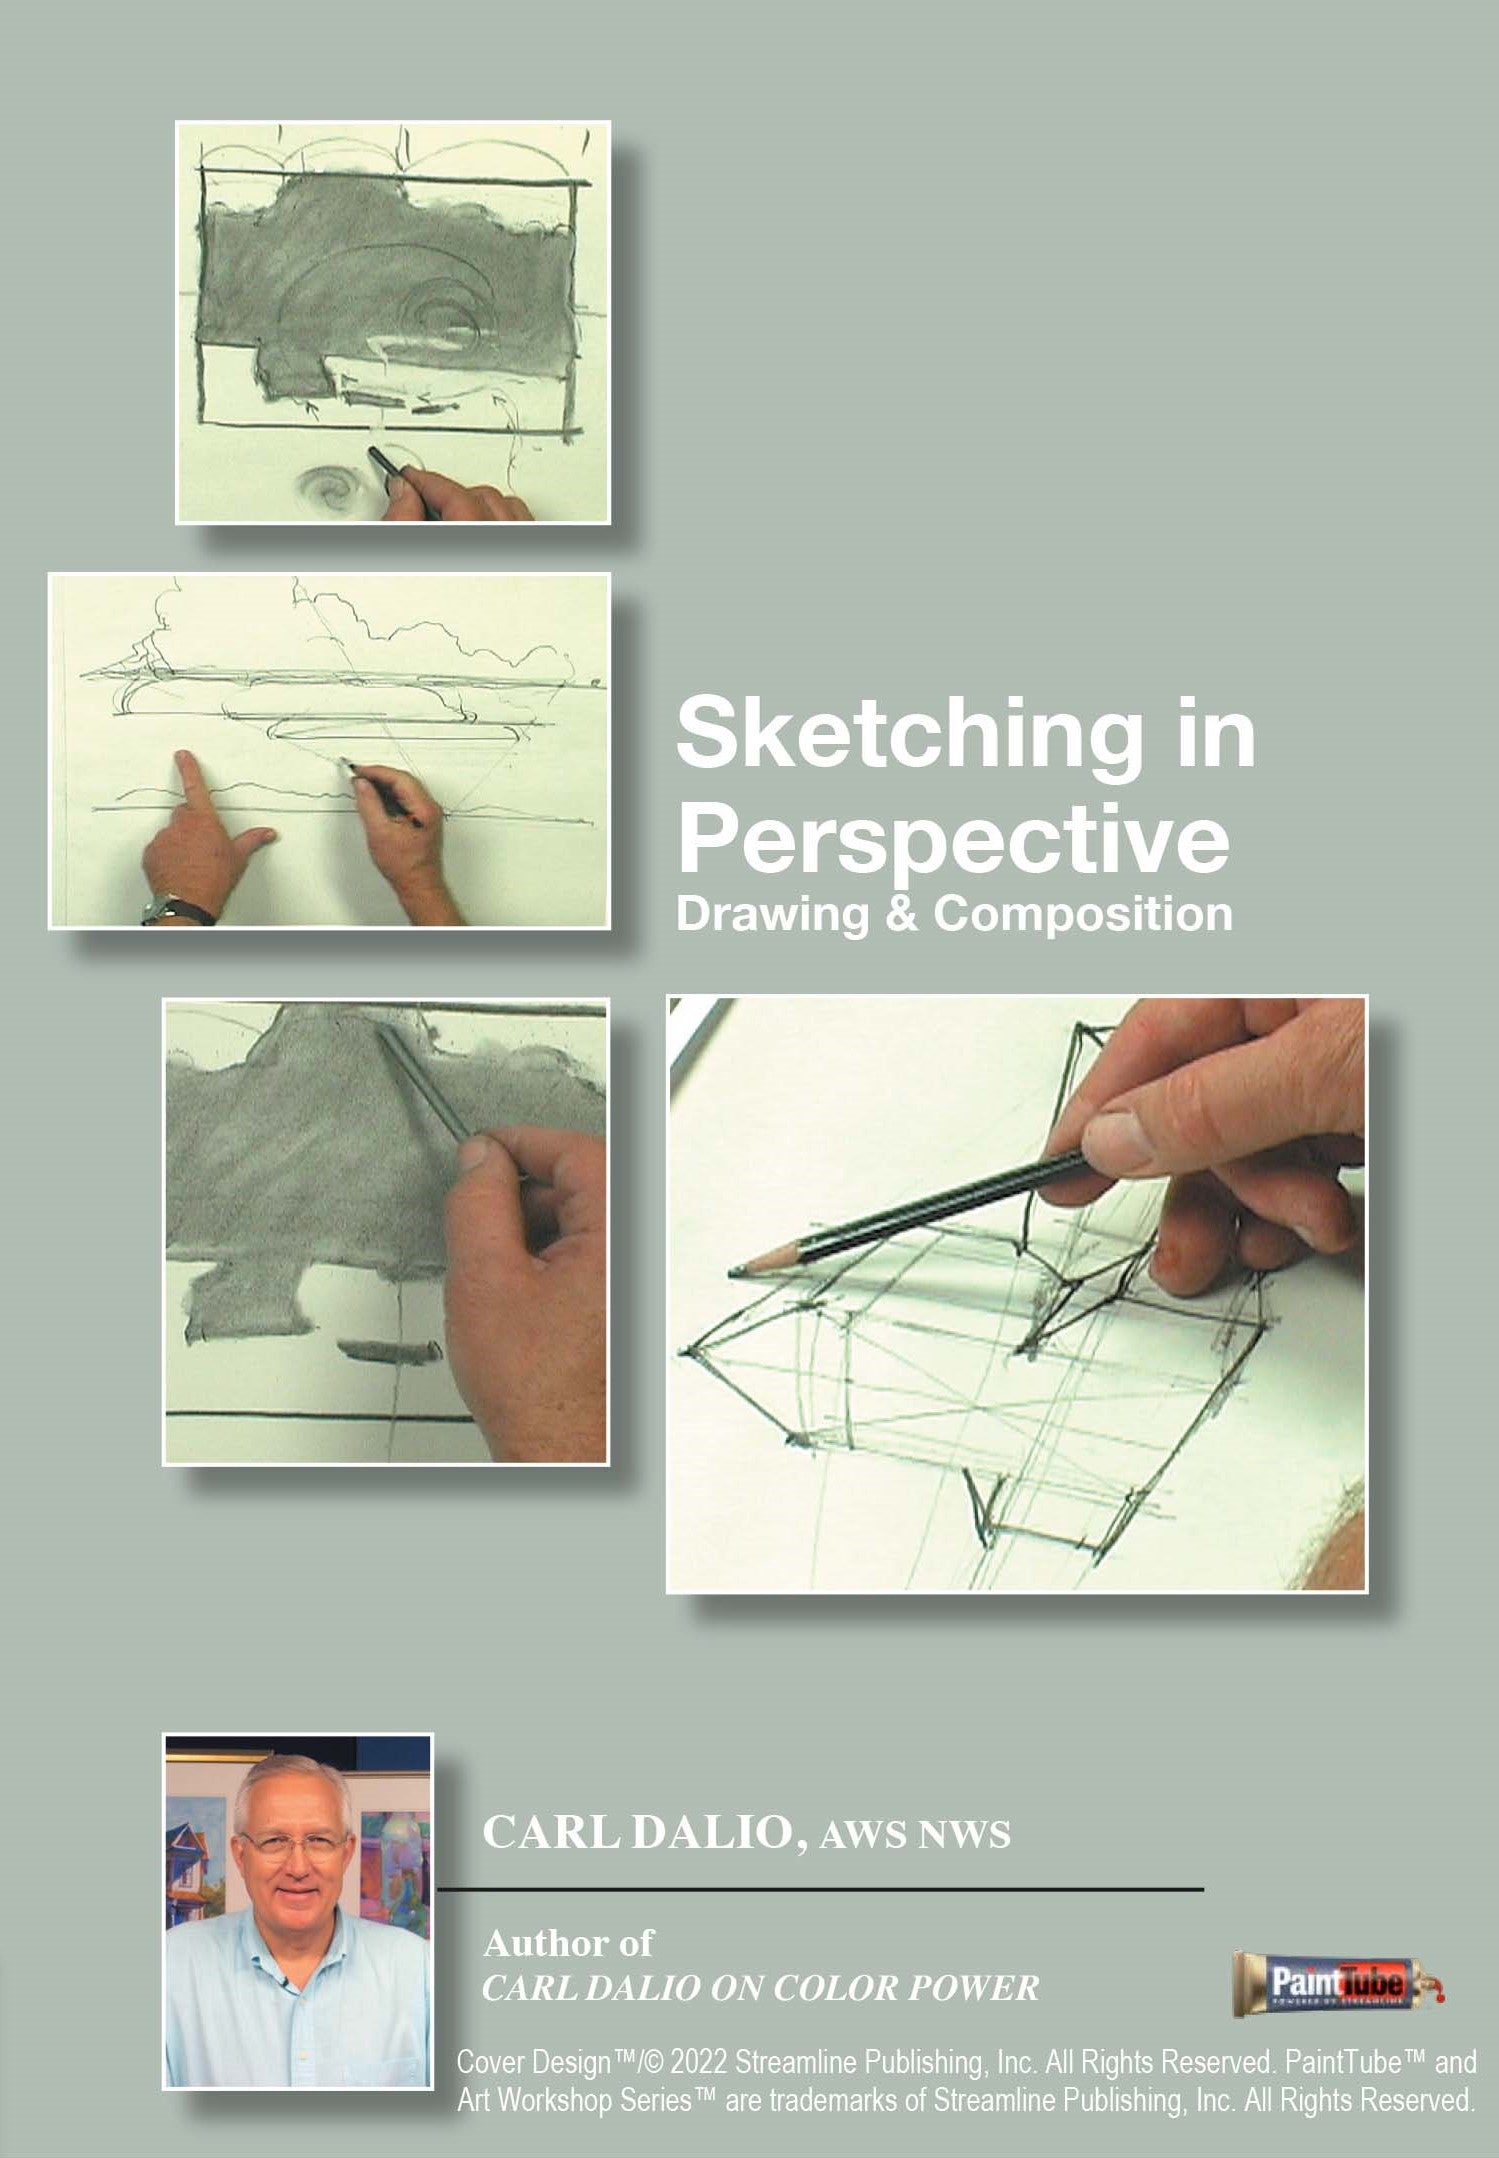 Carl Dalio: Sketching in Perspective